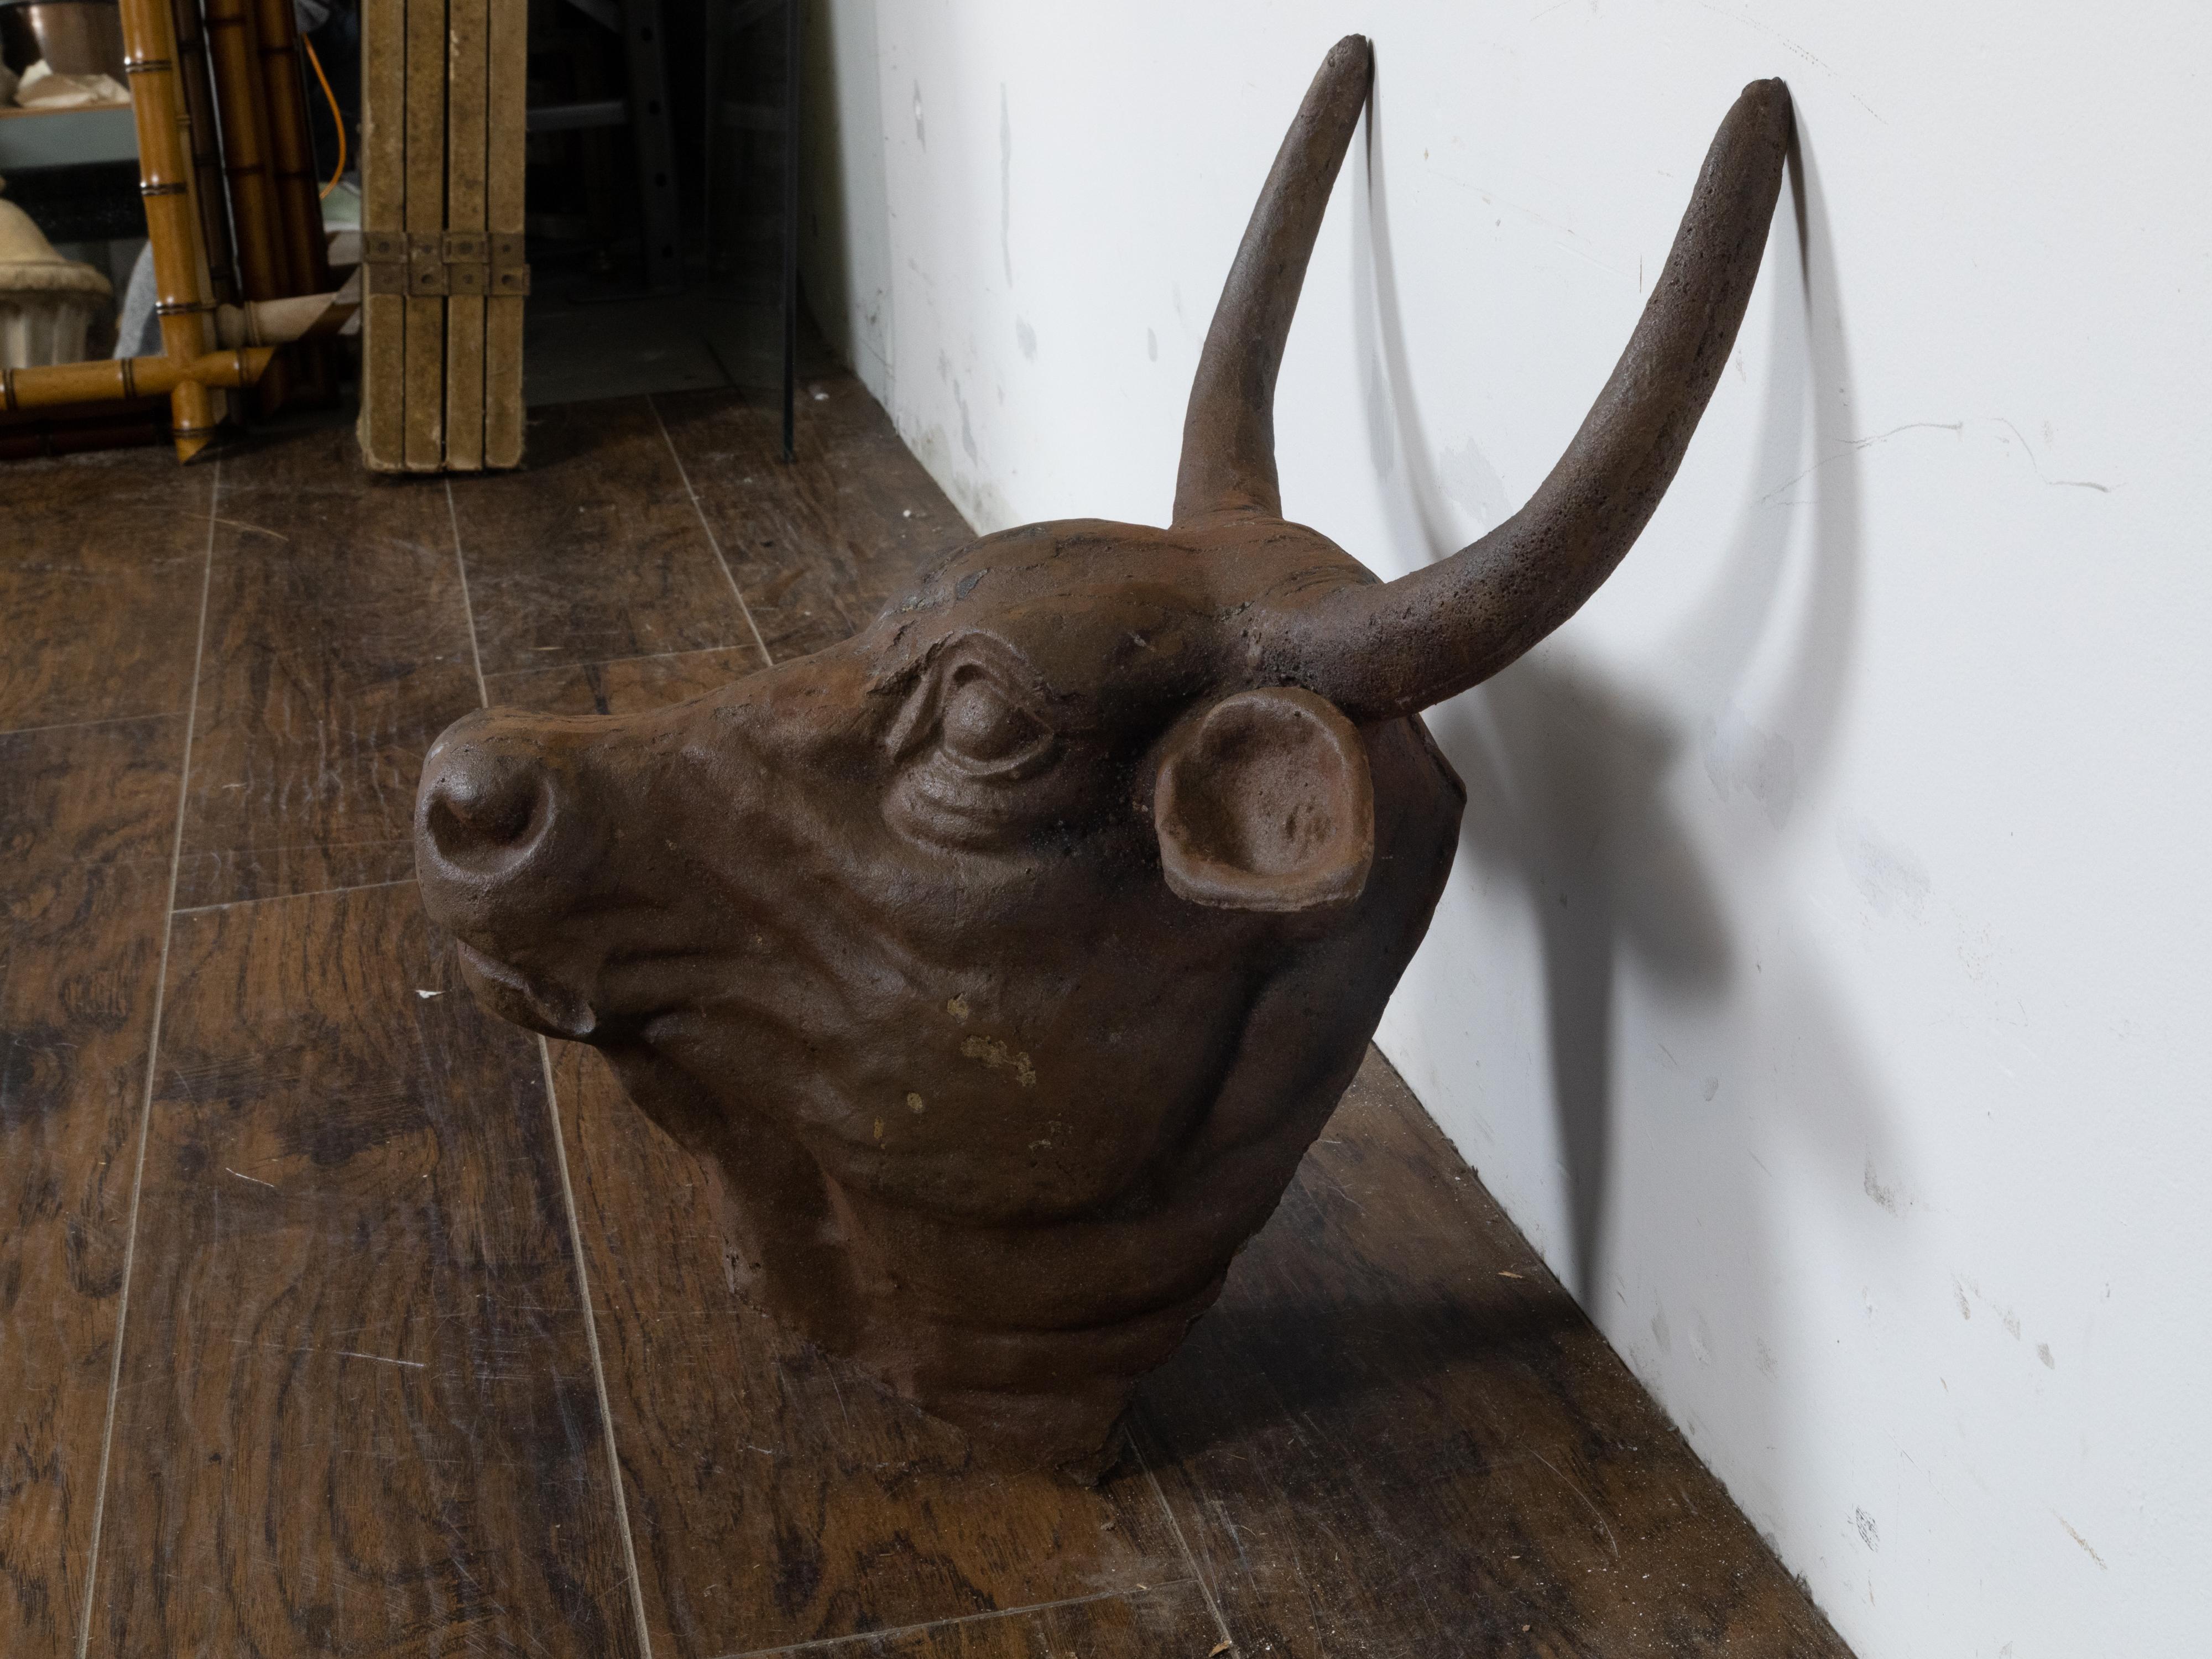 English 1930s-1940s Cast Iron Bull Wall Hanging Sculpture with Rusty Patina For Sale 5